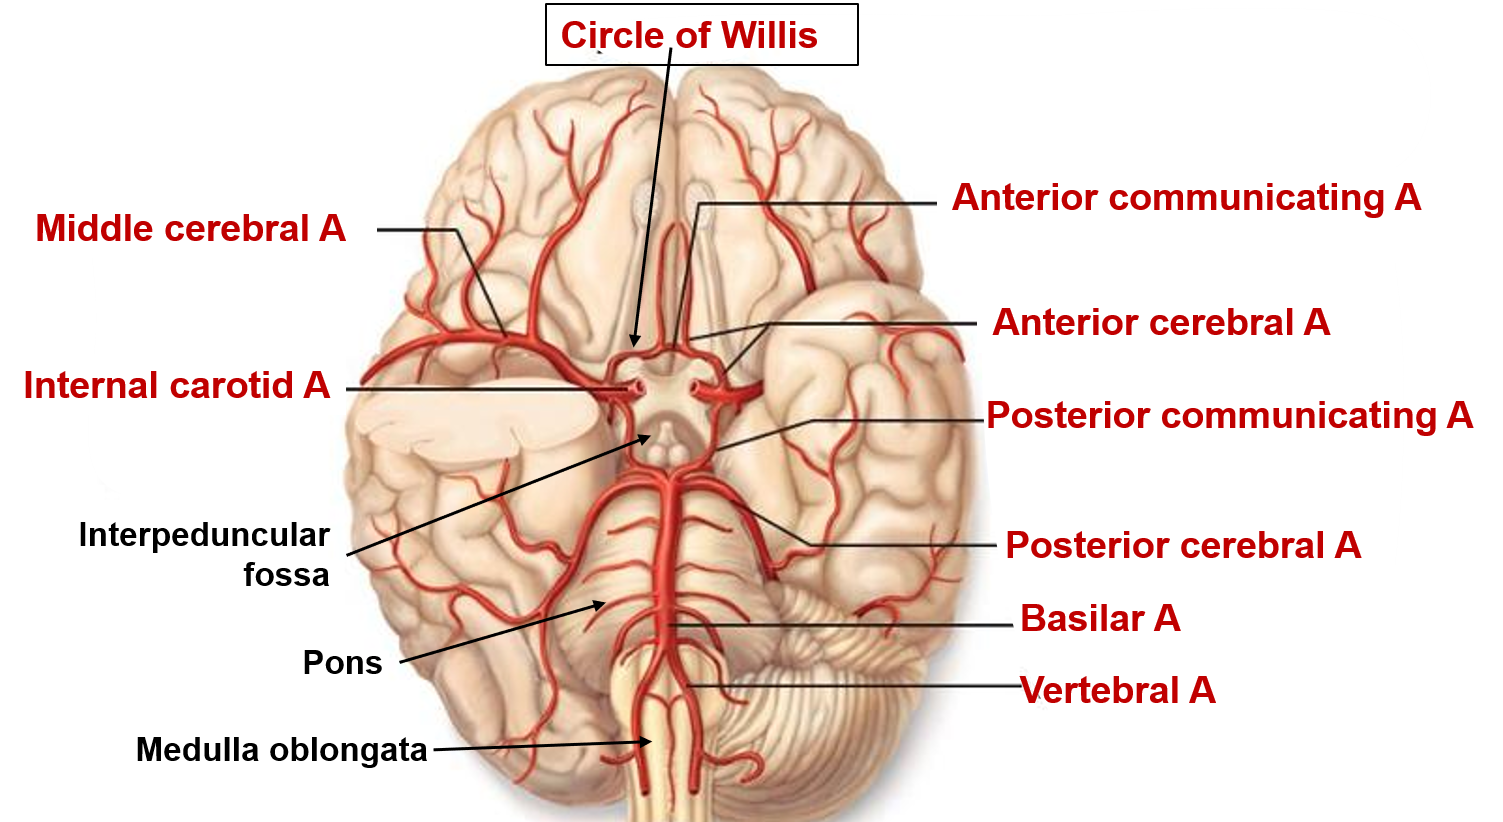 formation of circle of Willis